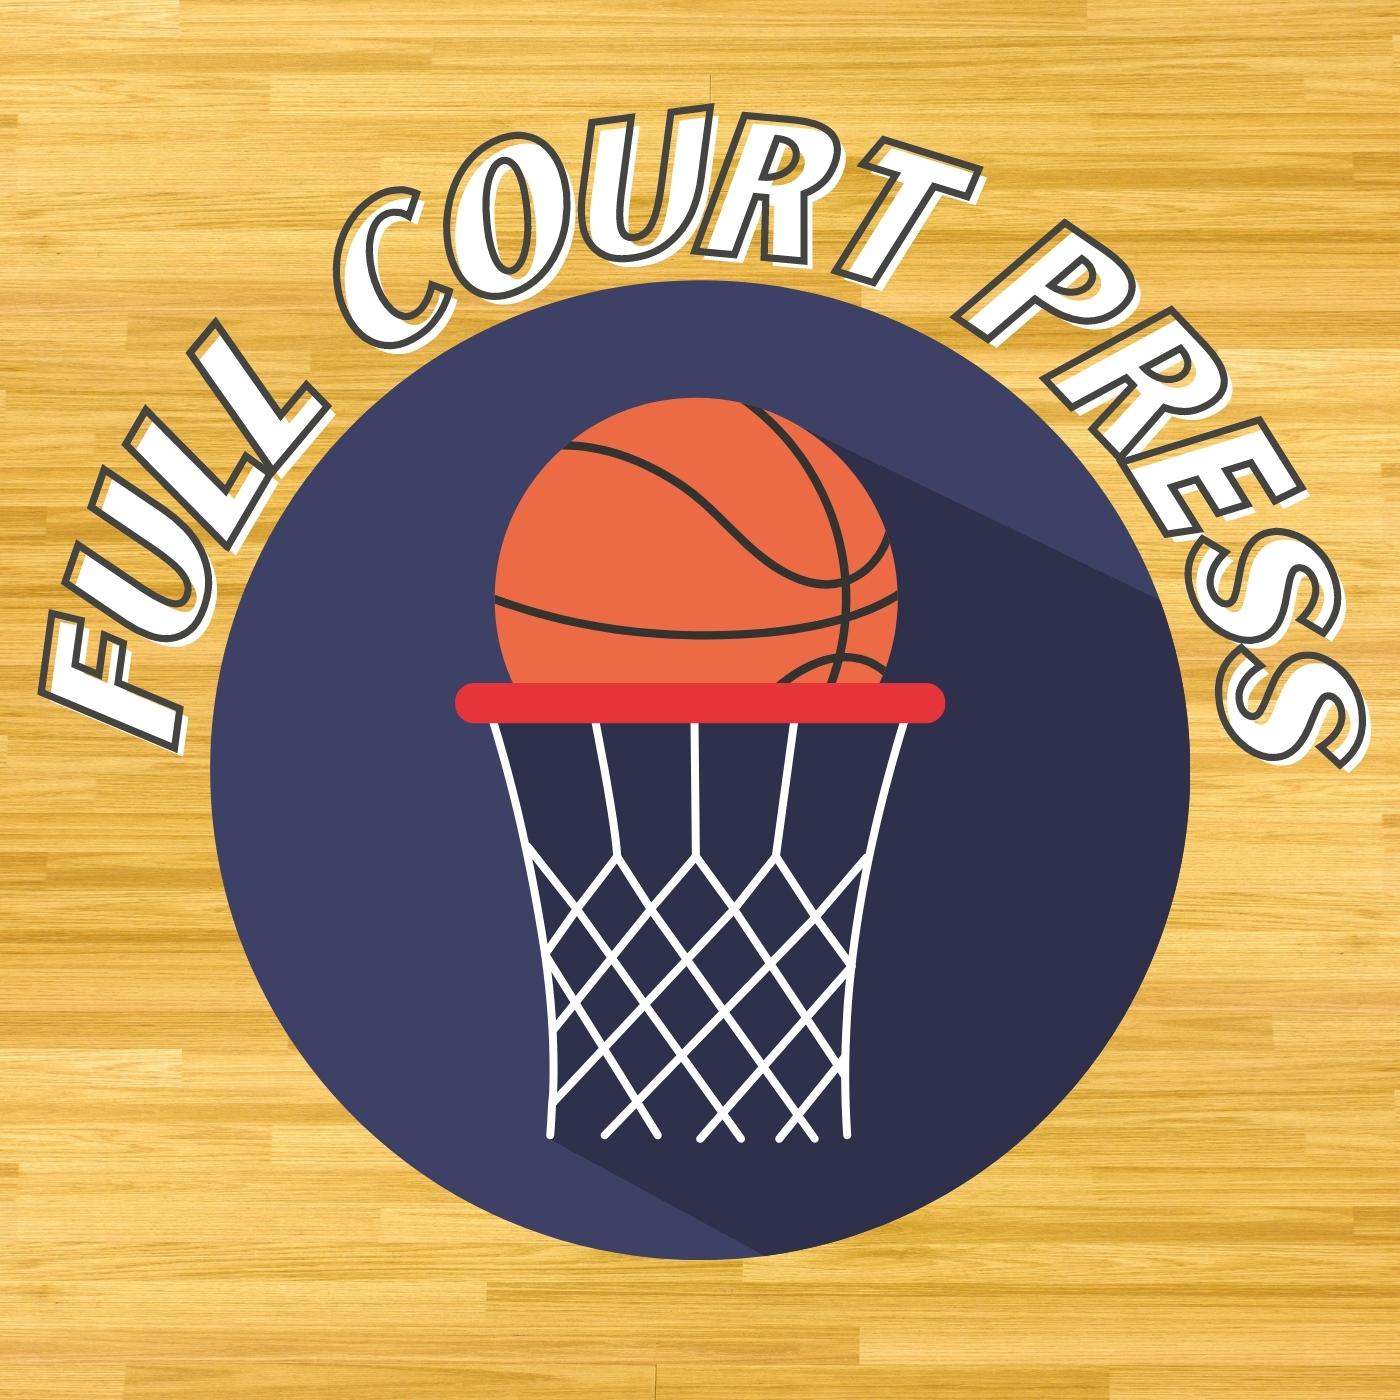 Full Court Press S02.E19 - NBA Eastern Conference Playoff Predictions